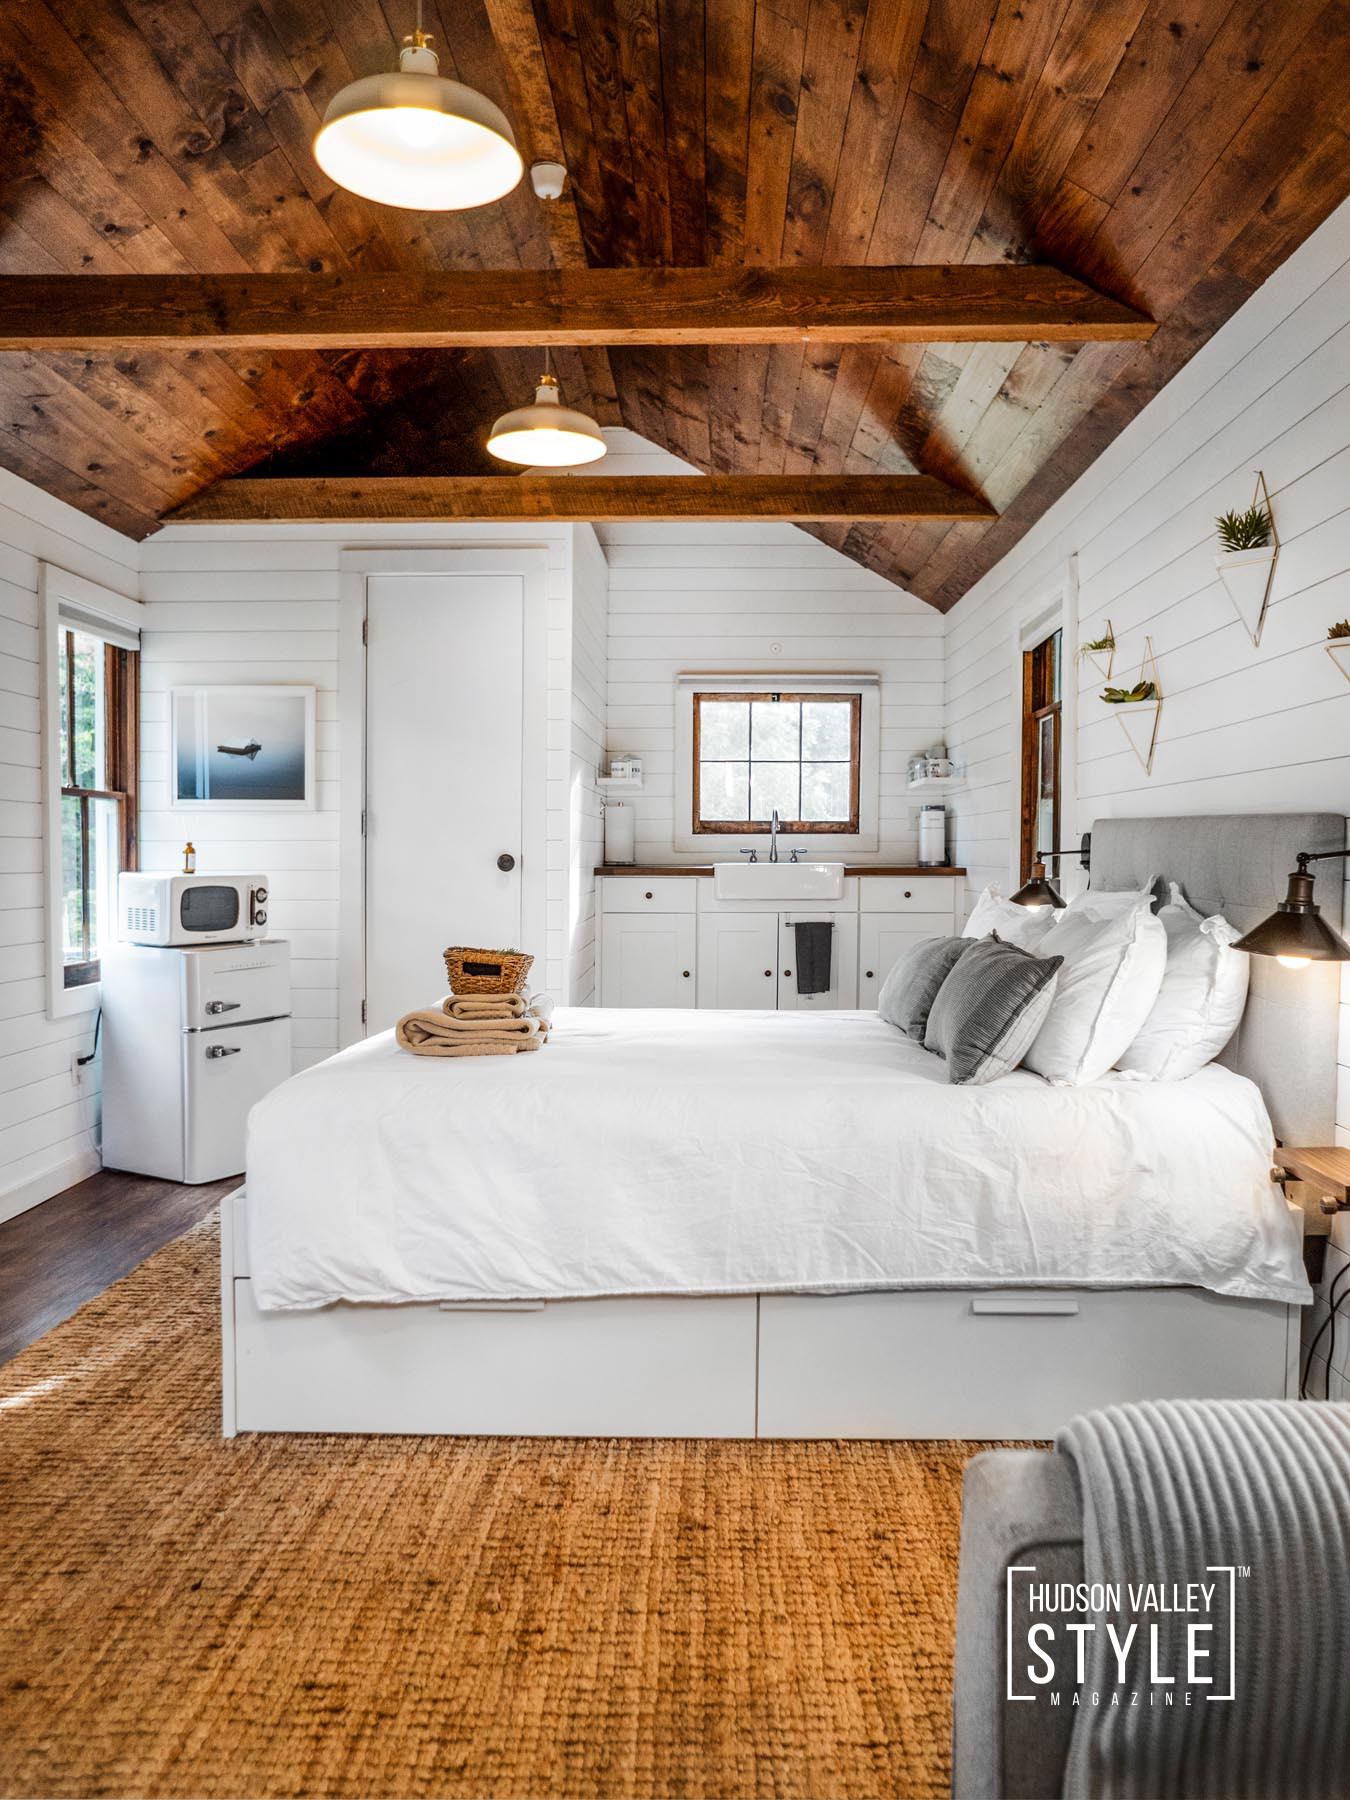 Spend a Weekend in a Charming Tiny Cottage on a Farm in the Hudson Valley – Airbnb Review by Photographer Maxwell Alexander / Alluvion Media